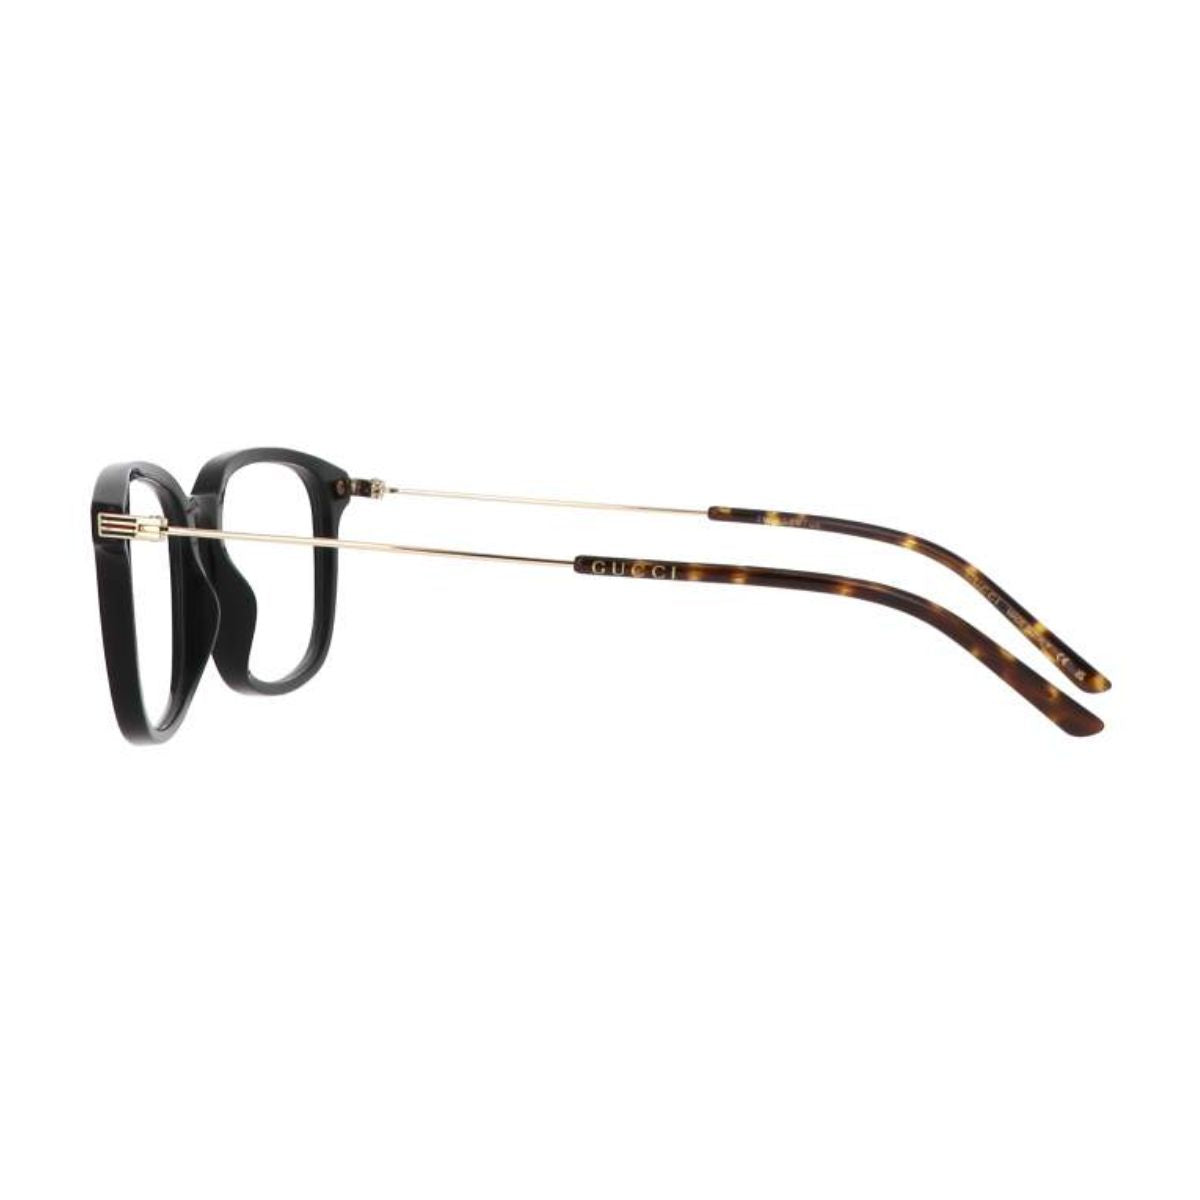 Discover the Latest Gucci Eyeglass Frames for Men - Optorium's Store"